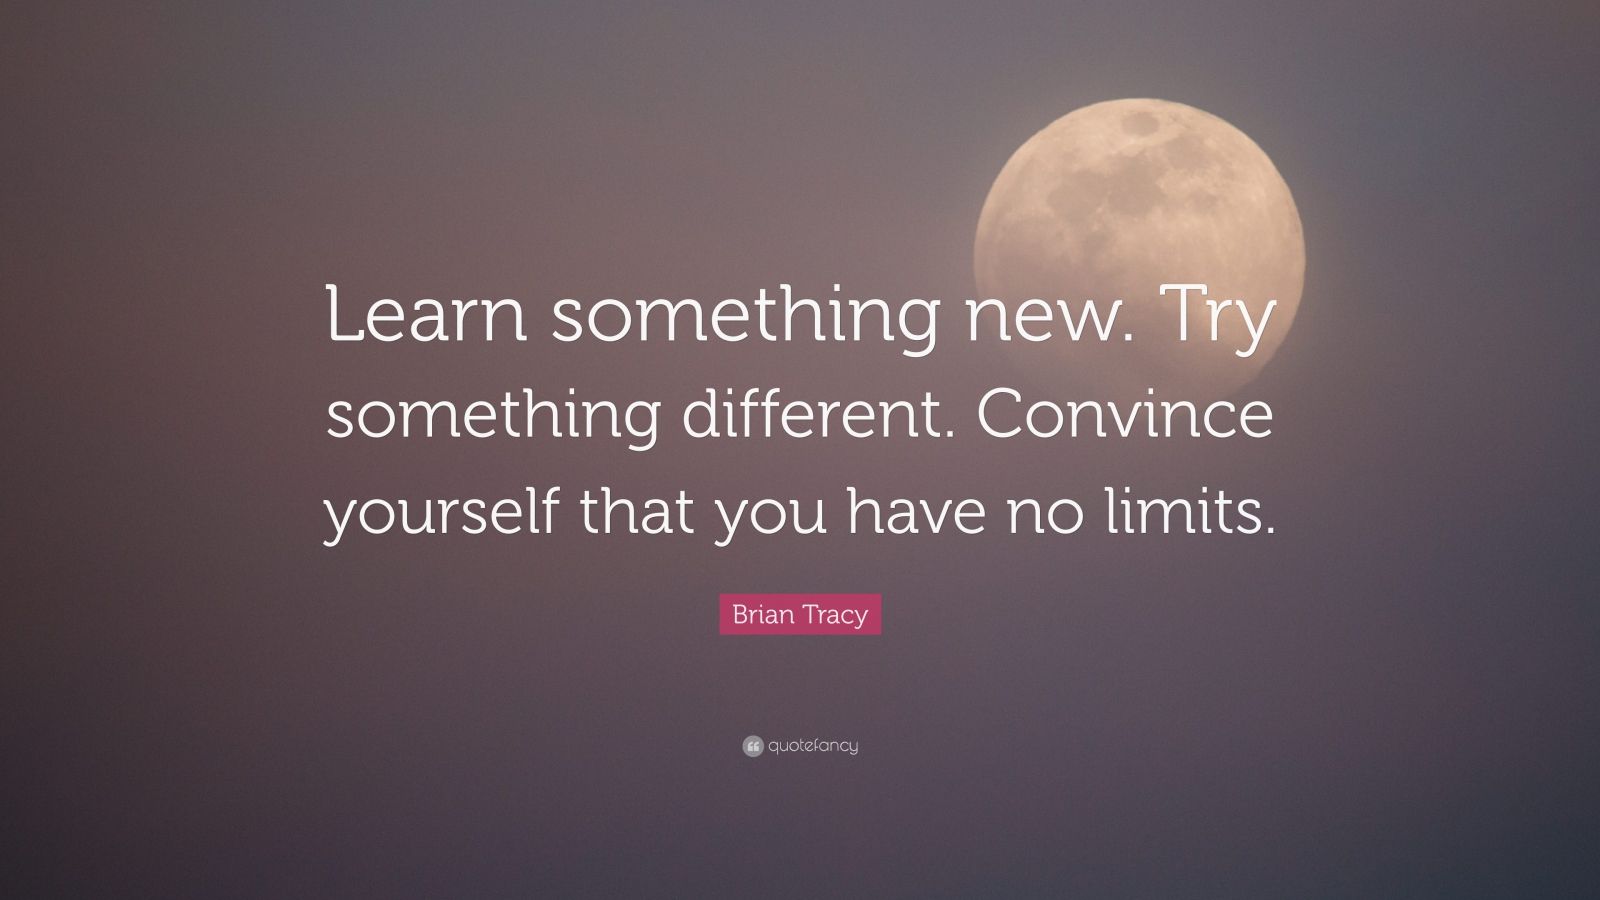 Brian Tracy Quote: “Learn something new. Try something different